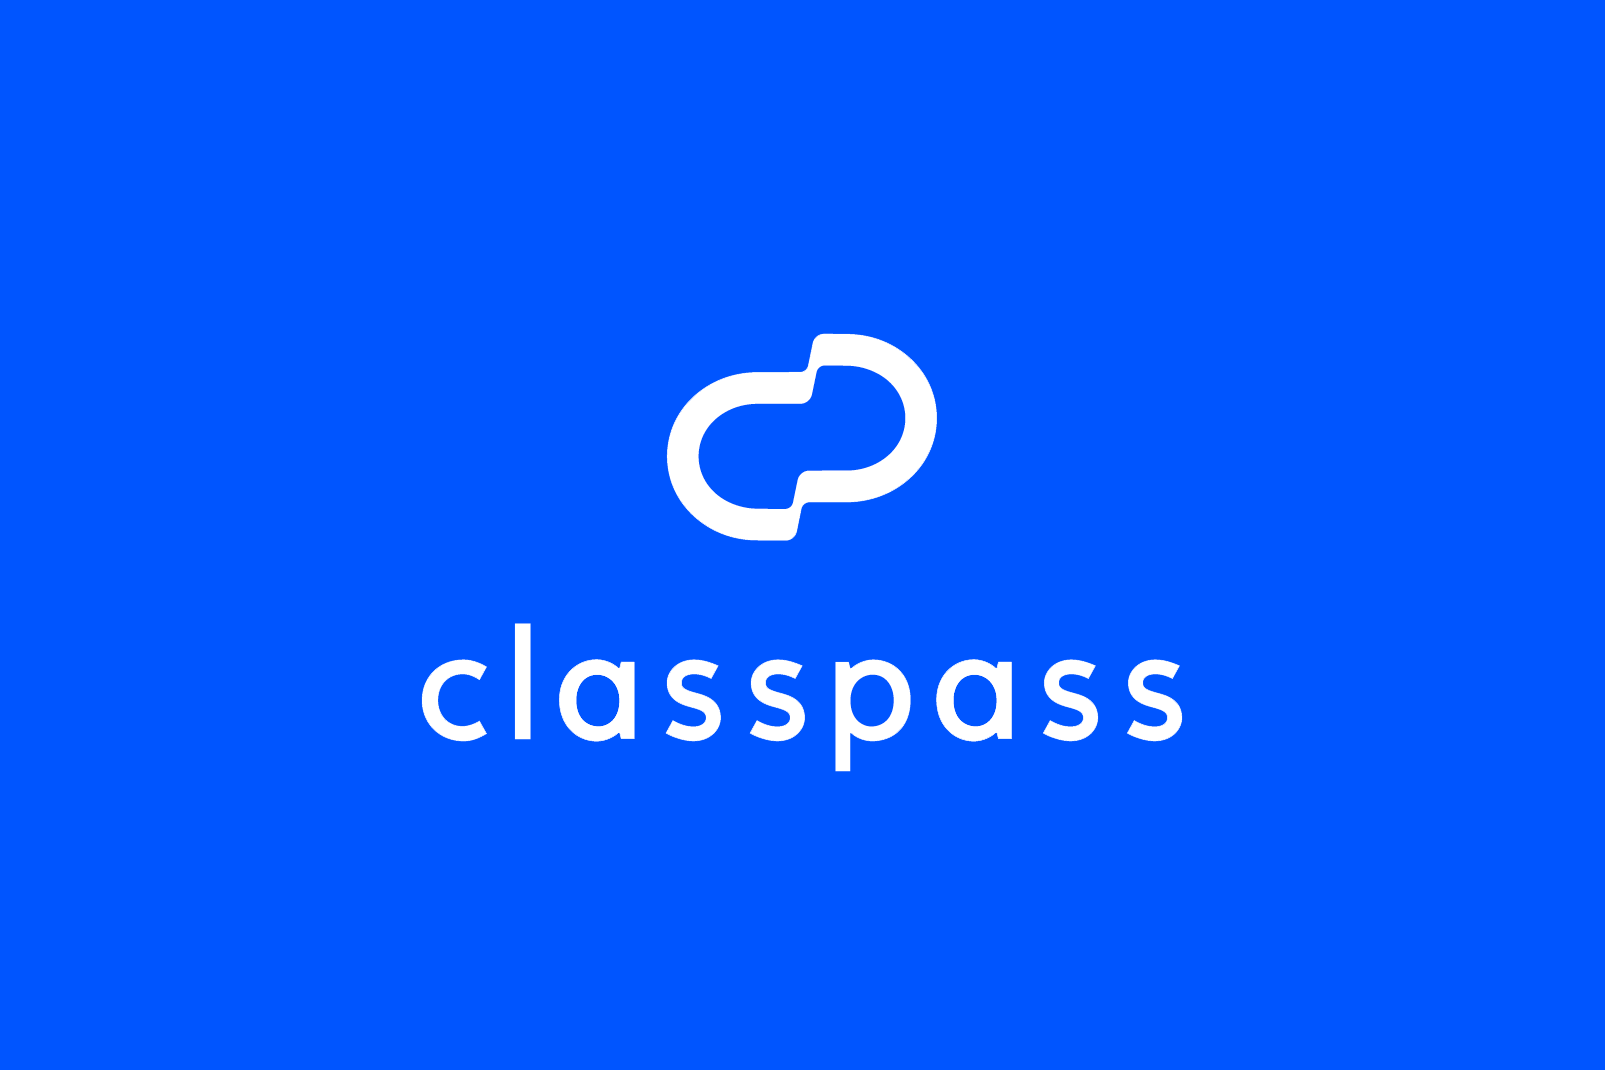 Tabata Ultimate Fitness: Read Reviews and Book Classes on ClassPass